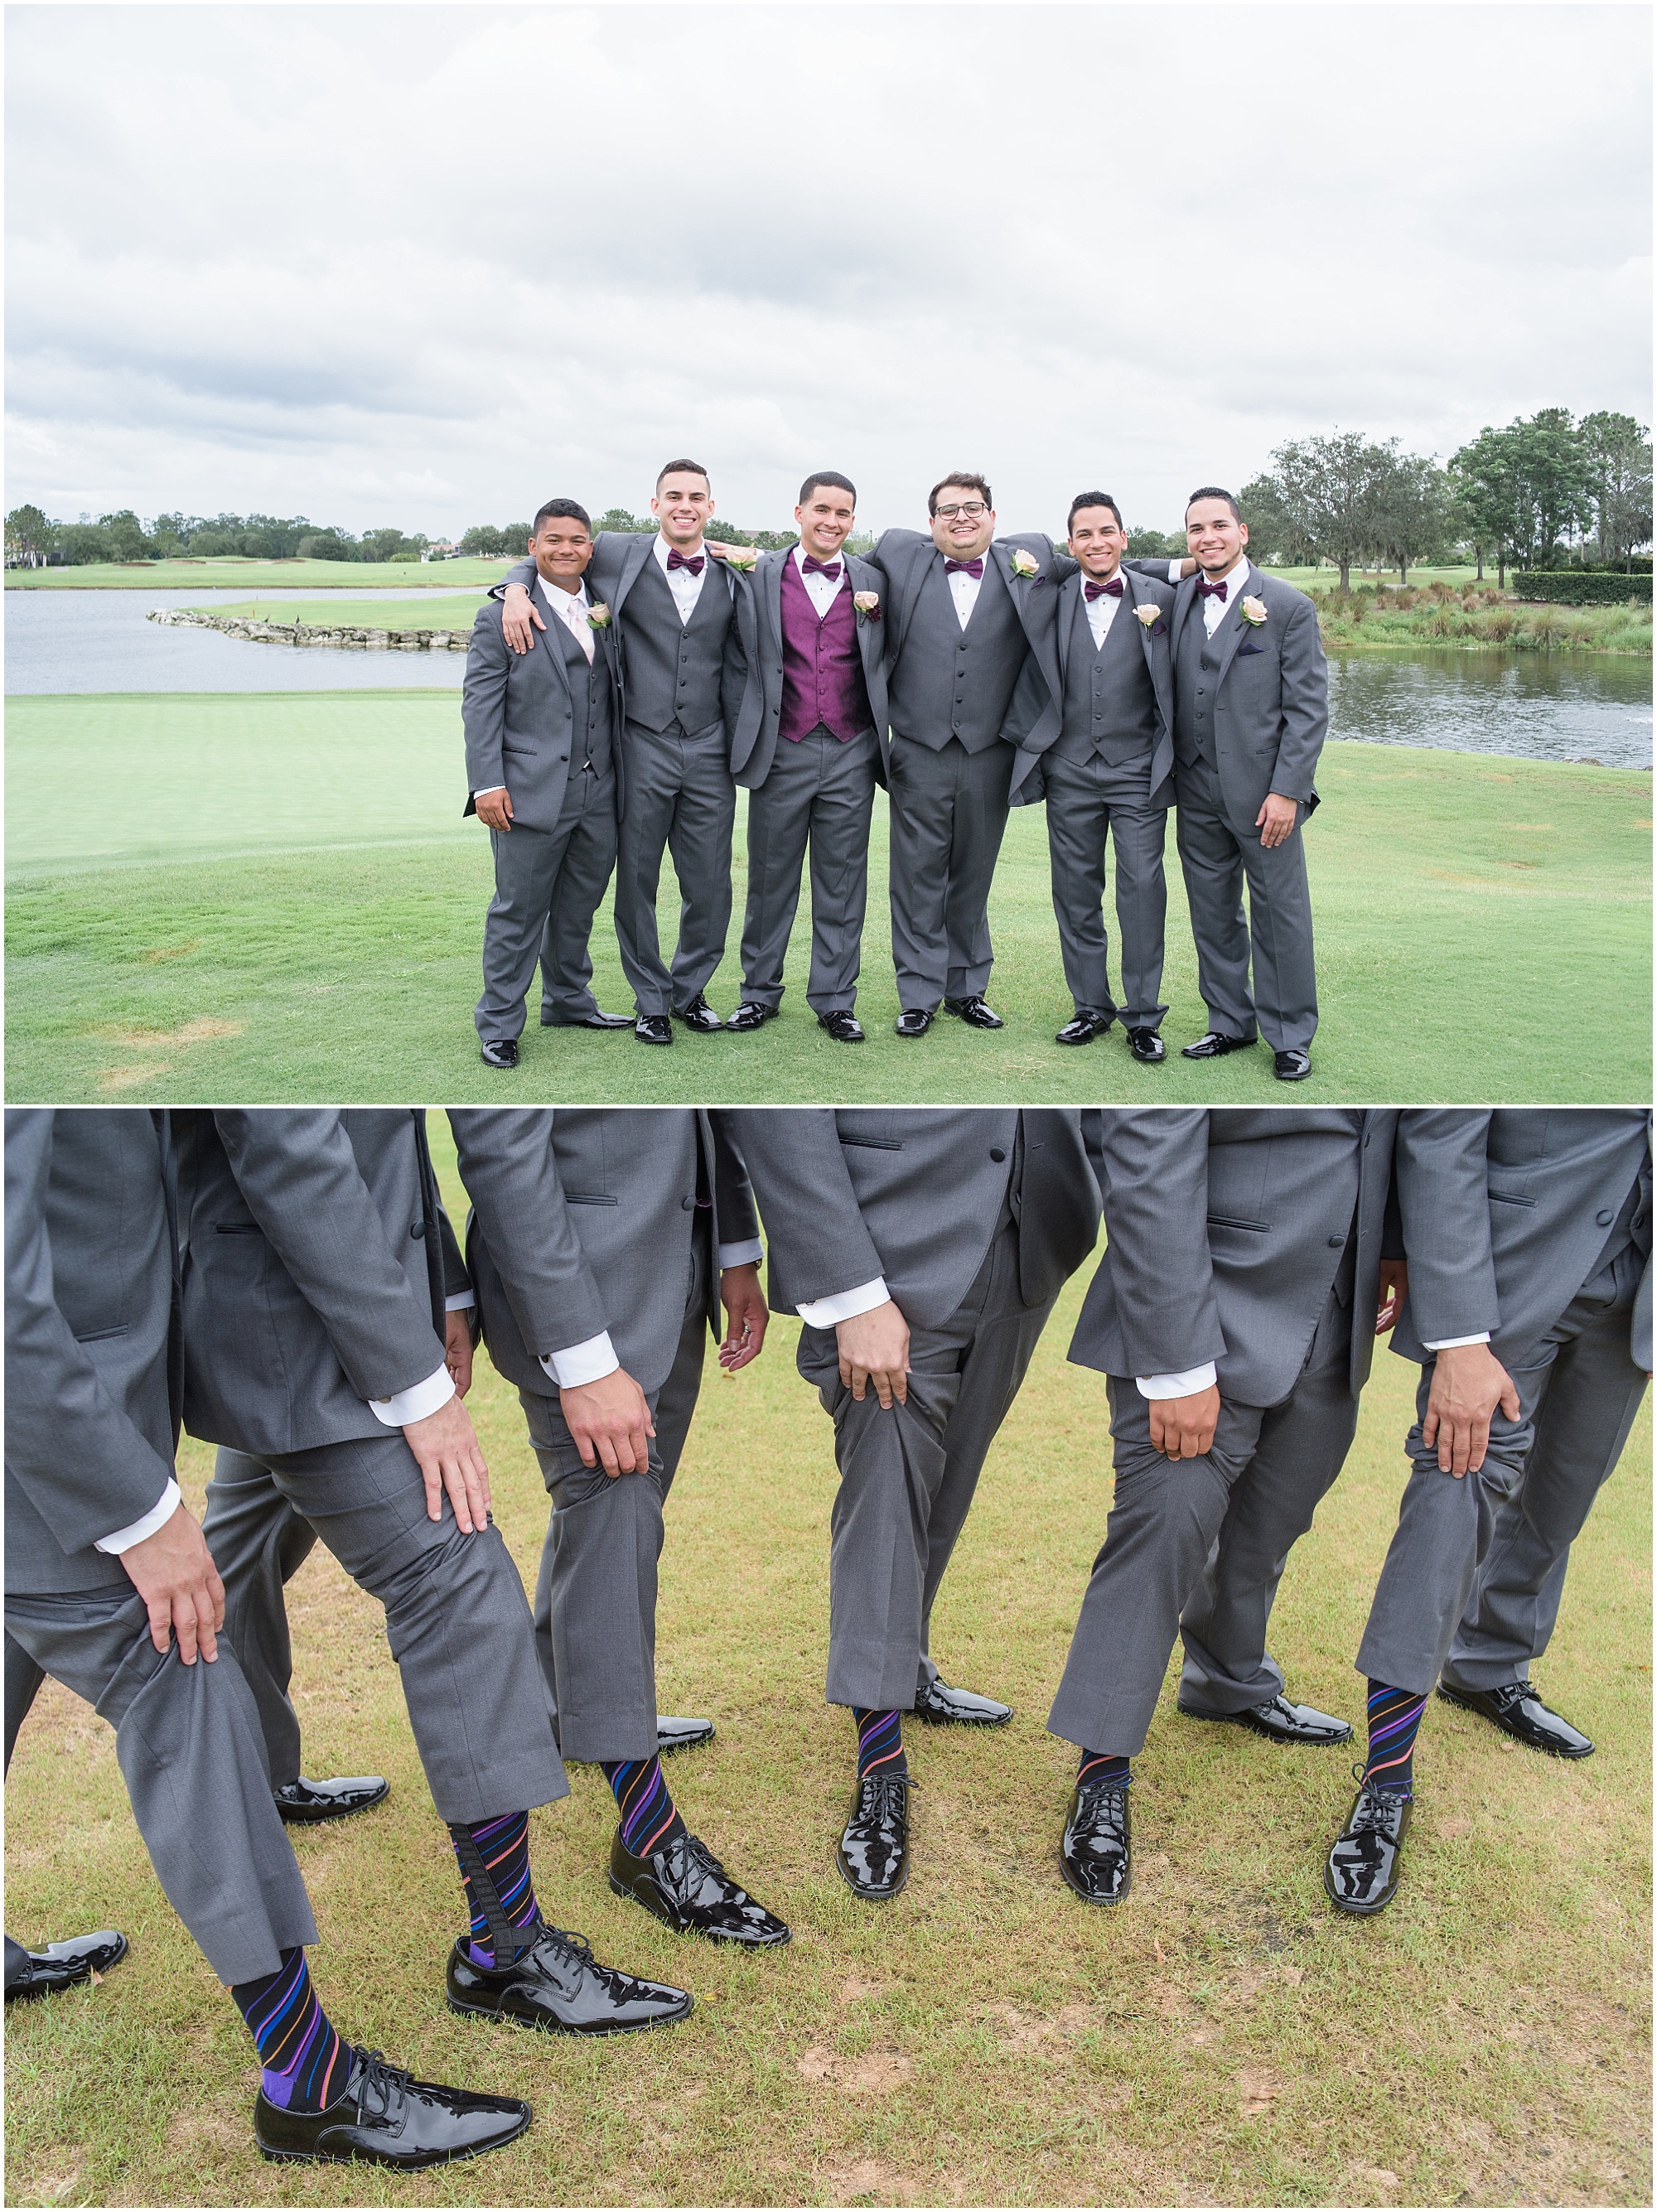 Groomsmen showing off their matching colorful socks. 